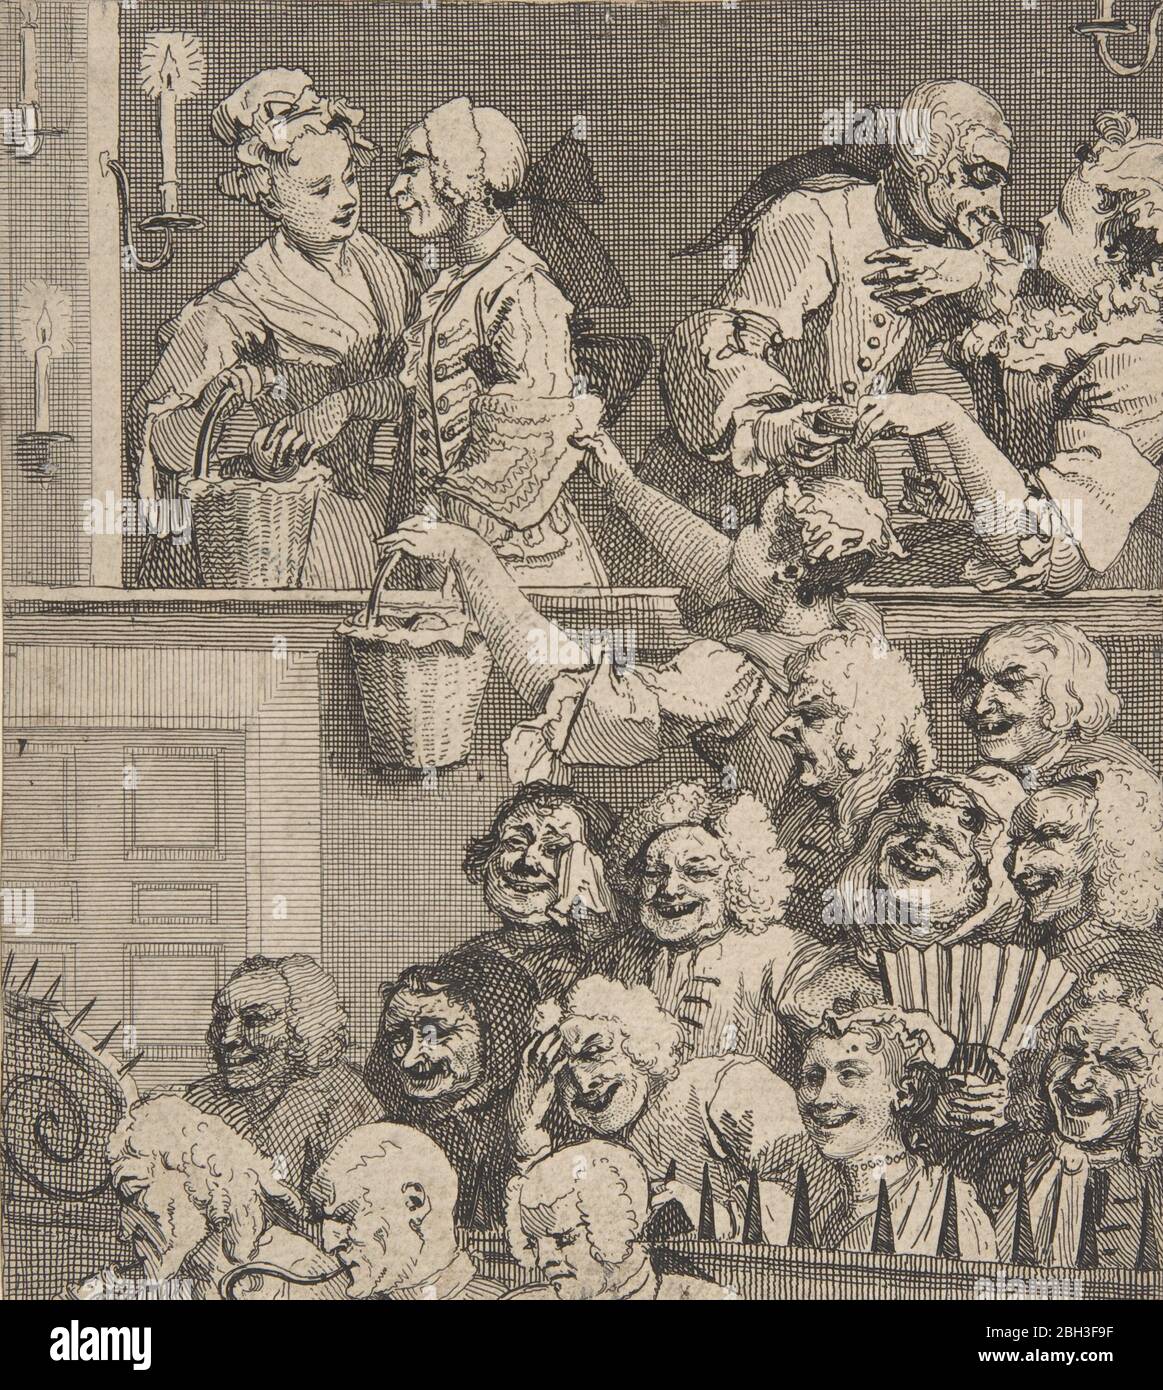 The Laughing Audience, December 1733. Stock Photo